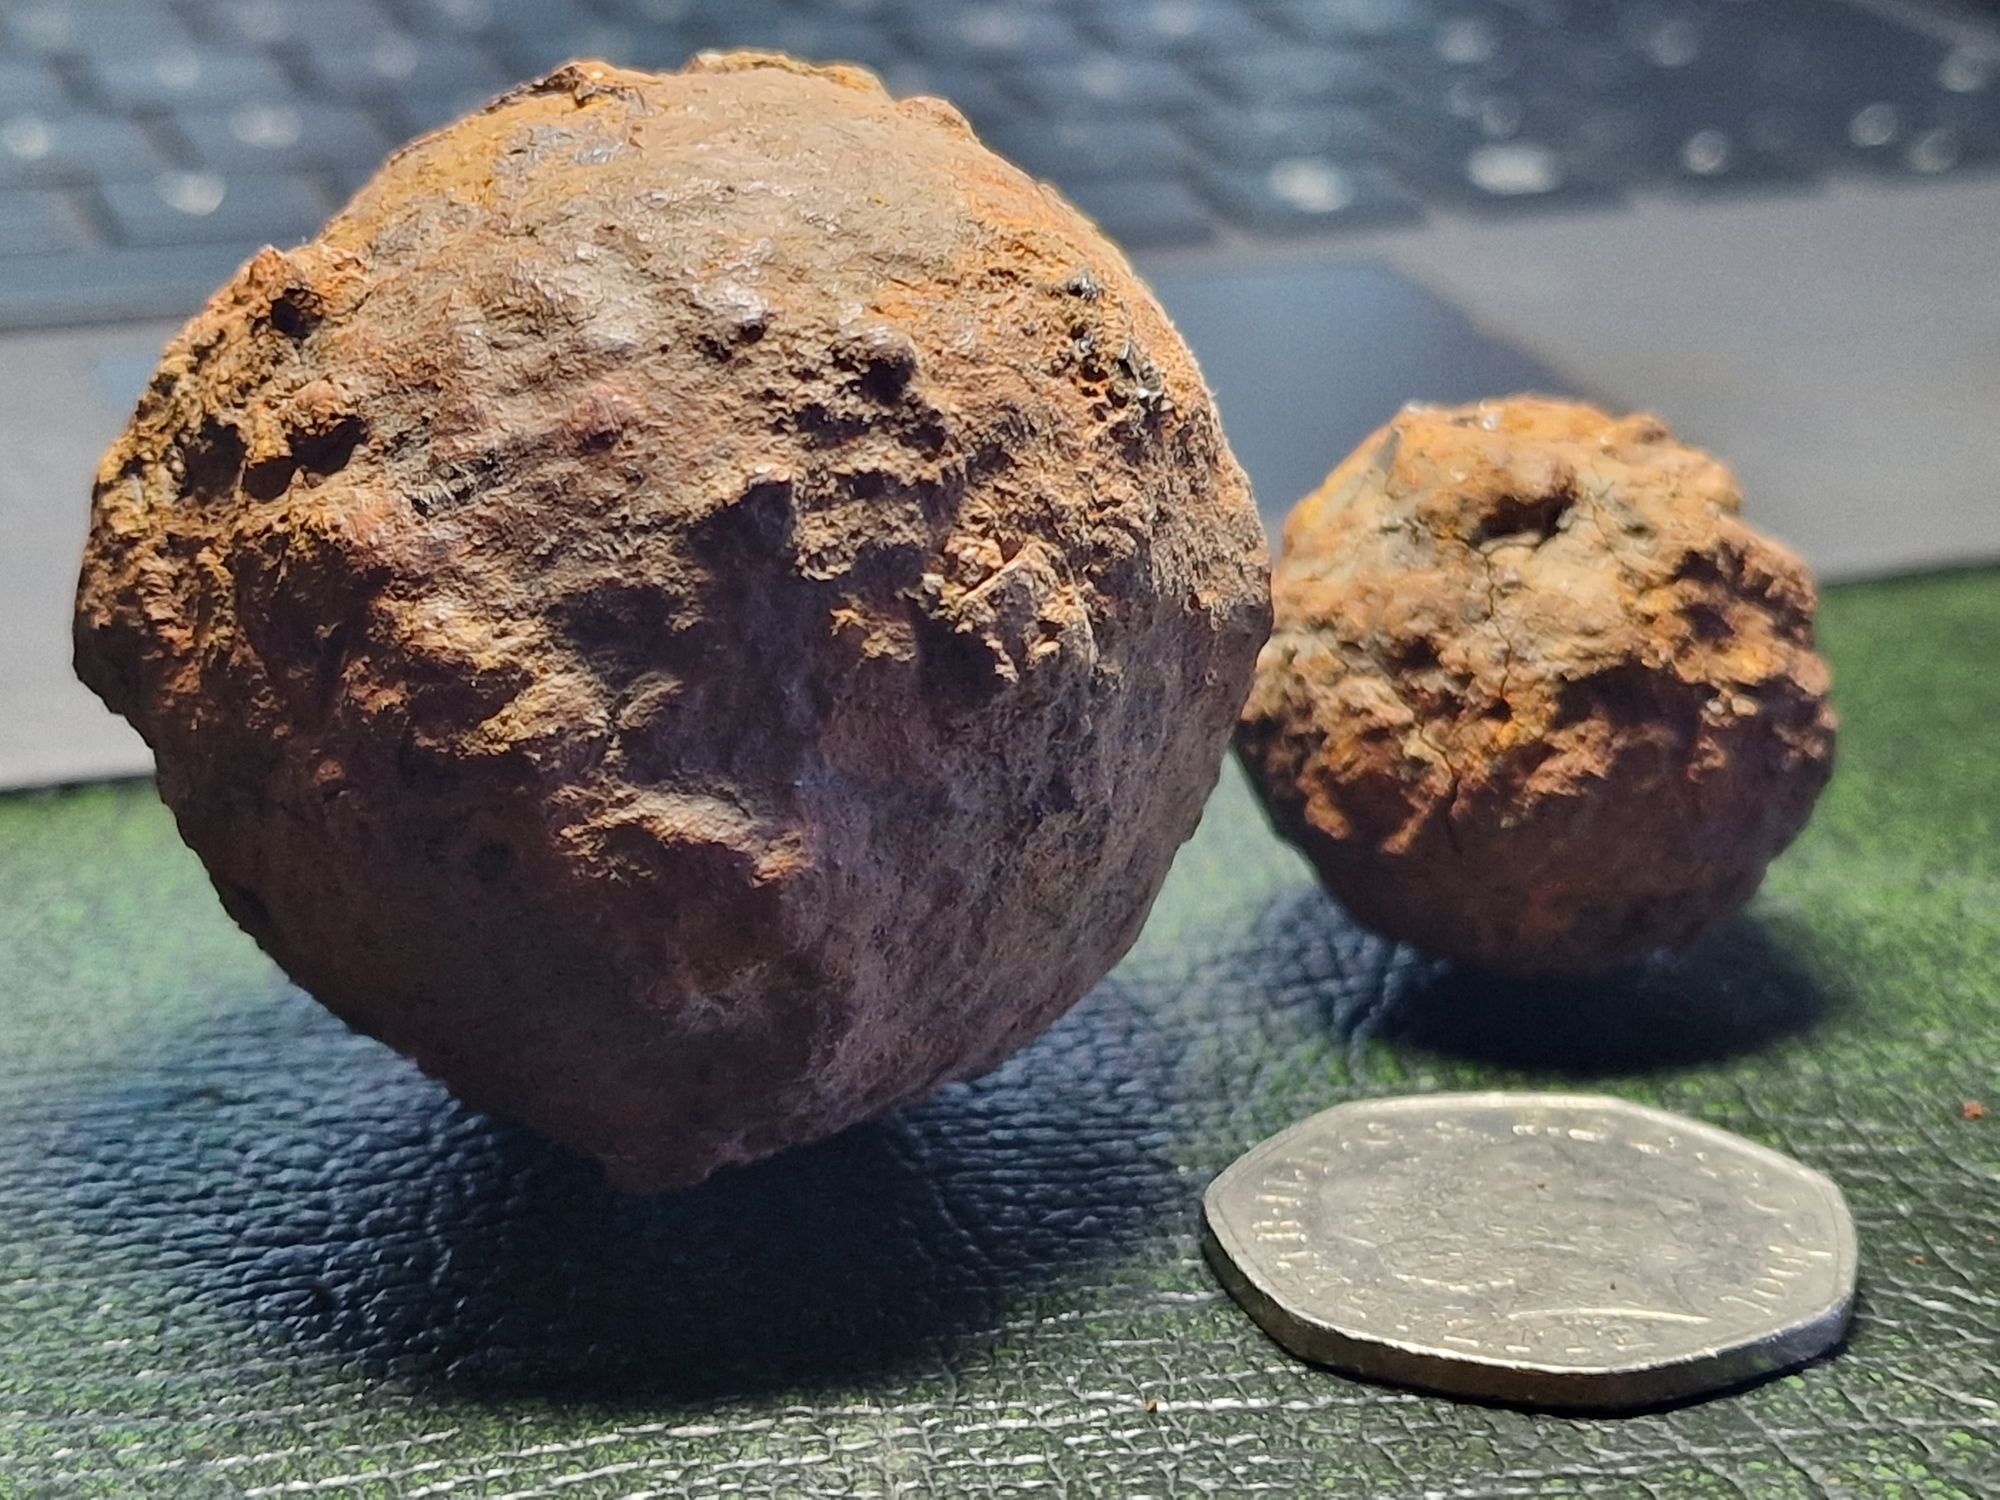 Could a Cannonball, Found in a Field in Werrington, Staffordshire, Be Proof That Oliver Cromwell Fought a Battle There in the English Civil War?